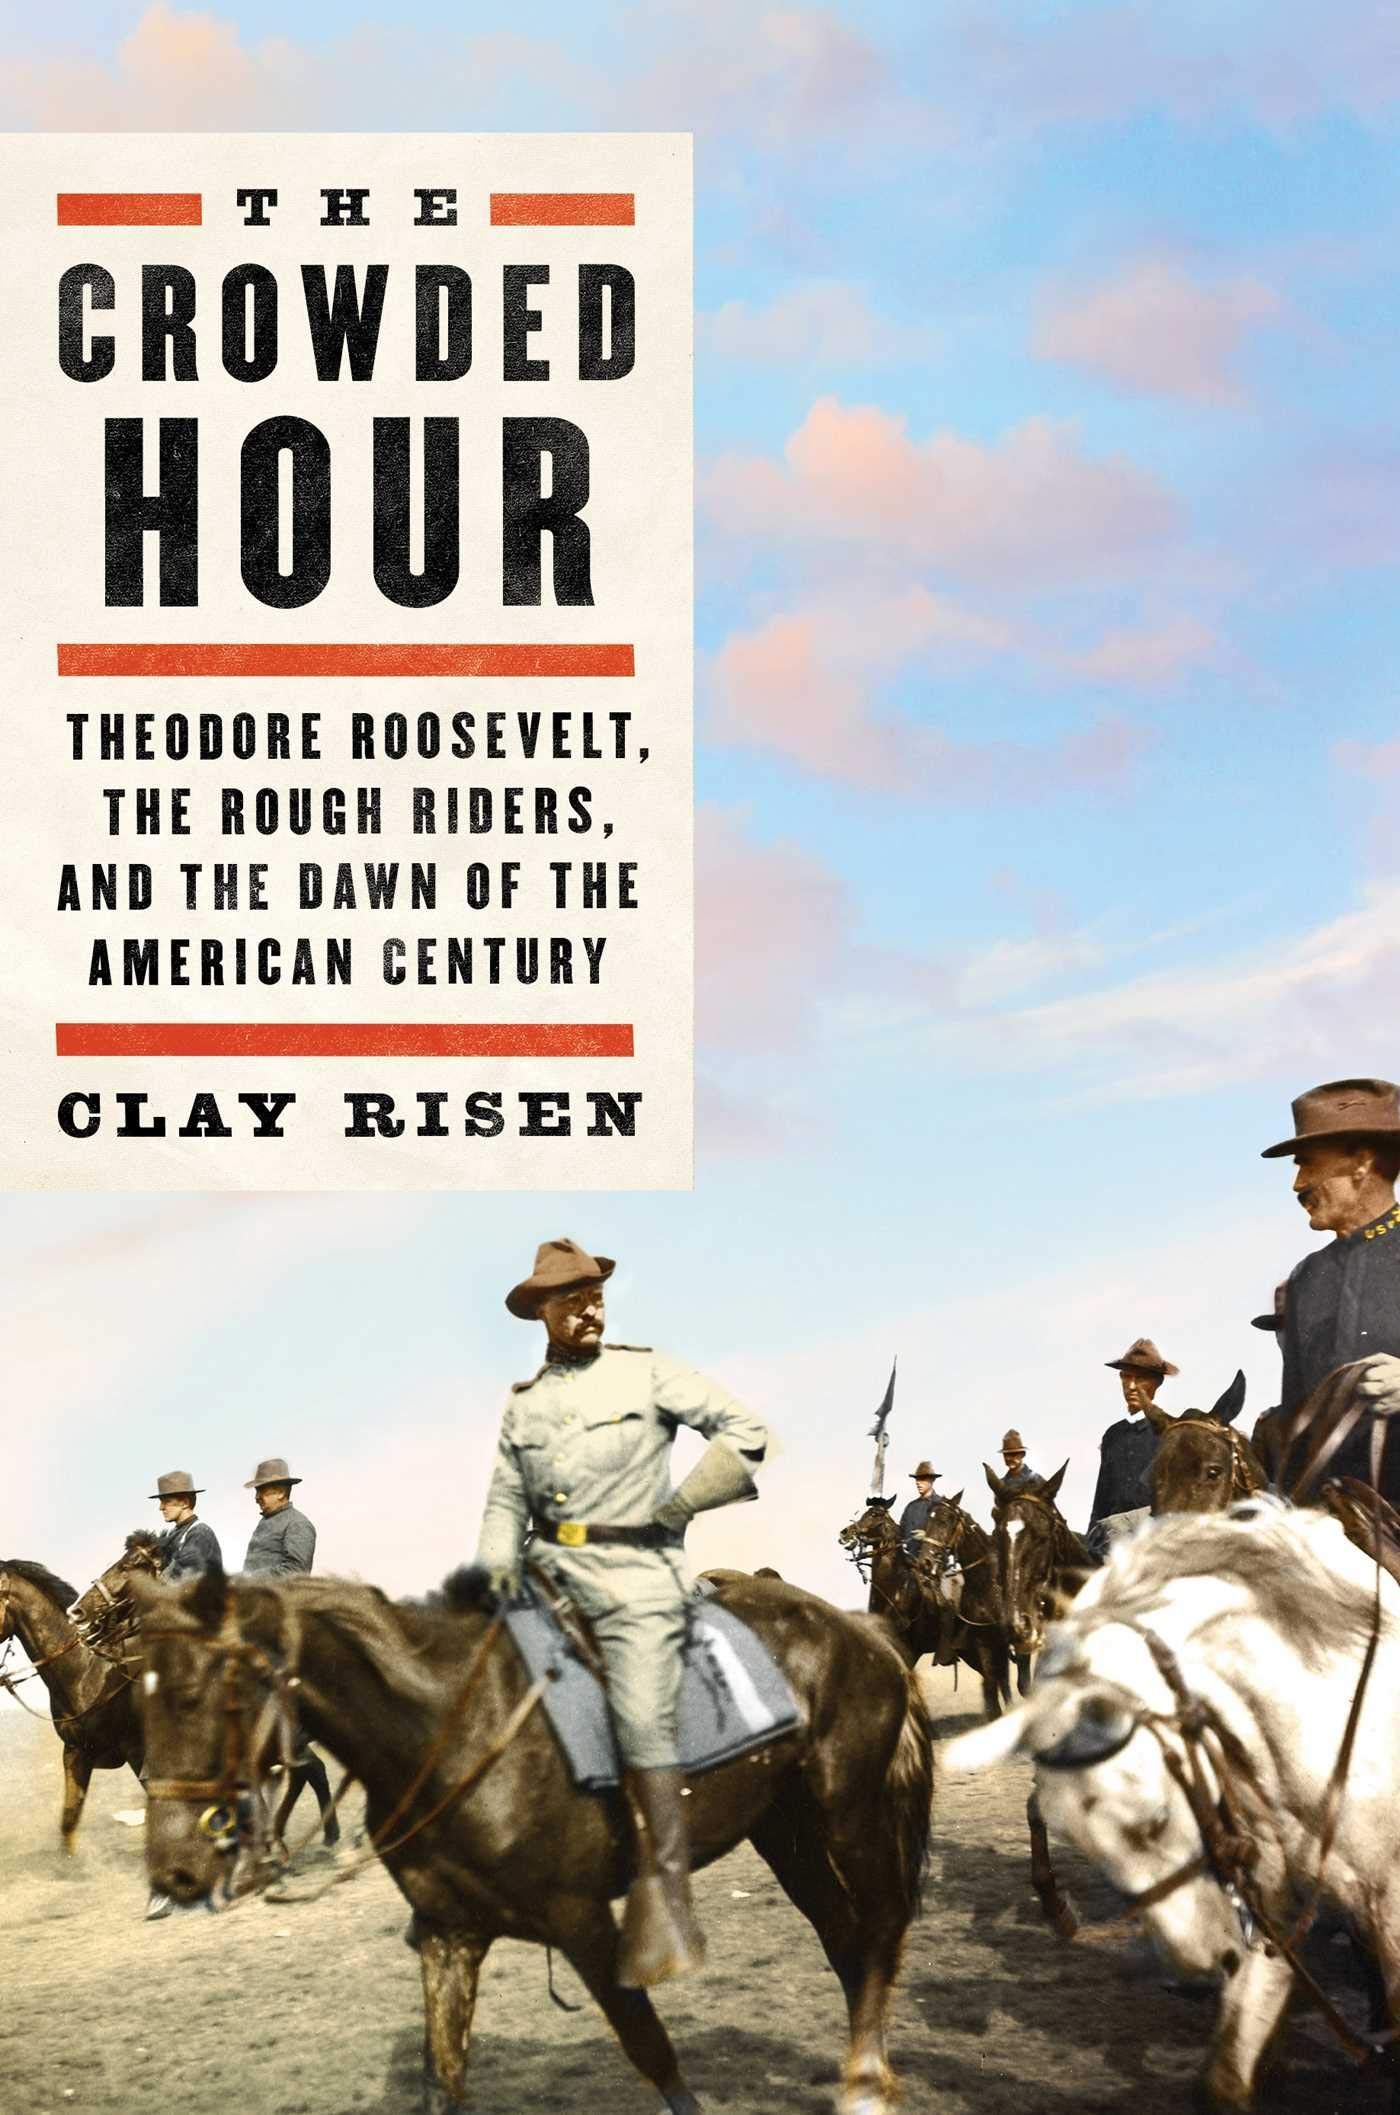 The Story We Tell Ourselves: On Clay Risen’s “The Crowded Hour: Theodore Roosevelt, the Rough Riders, and the Dawn of the American Century”